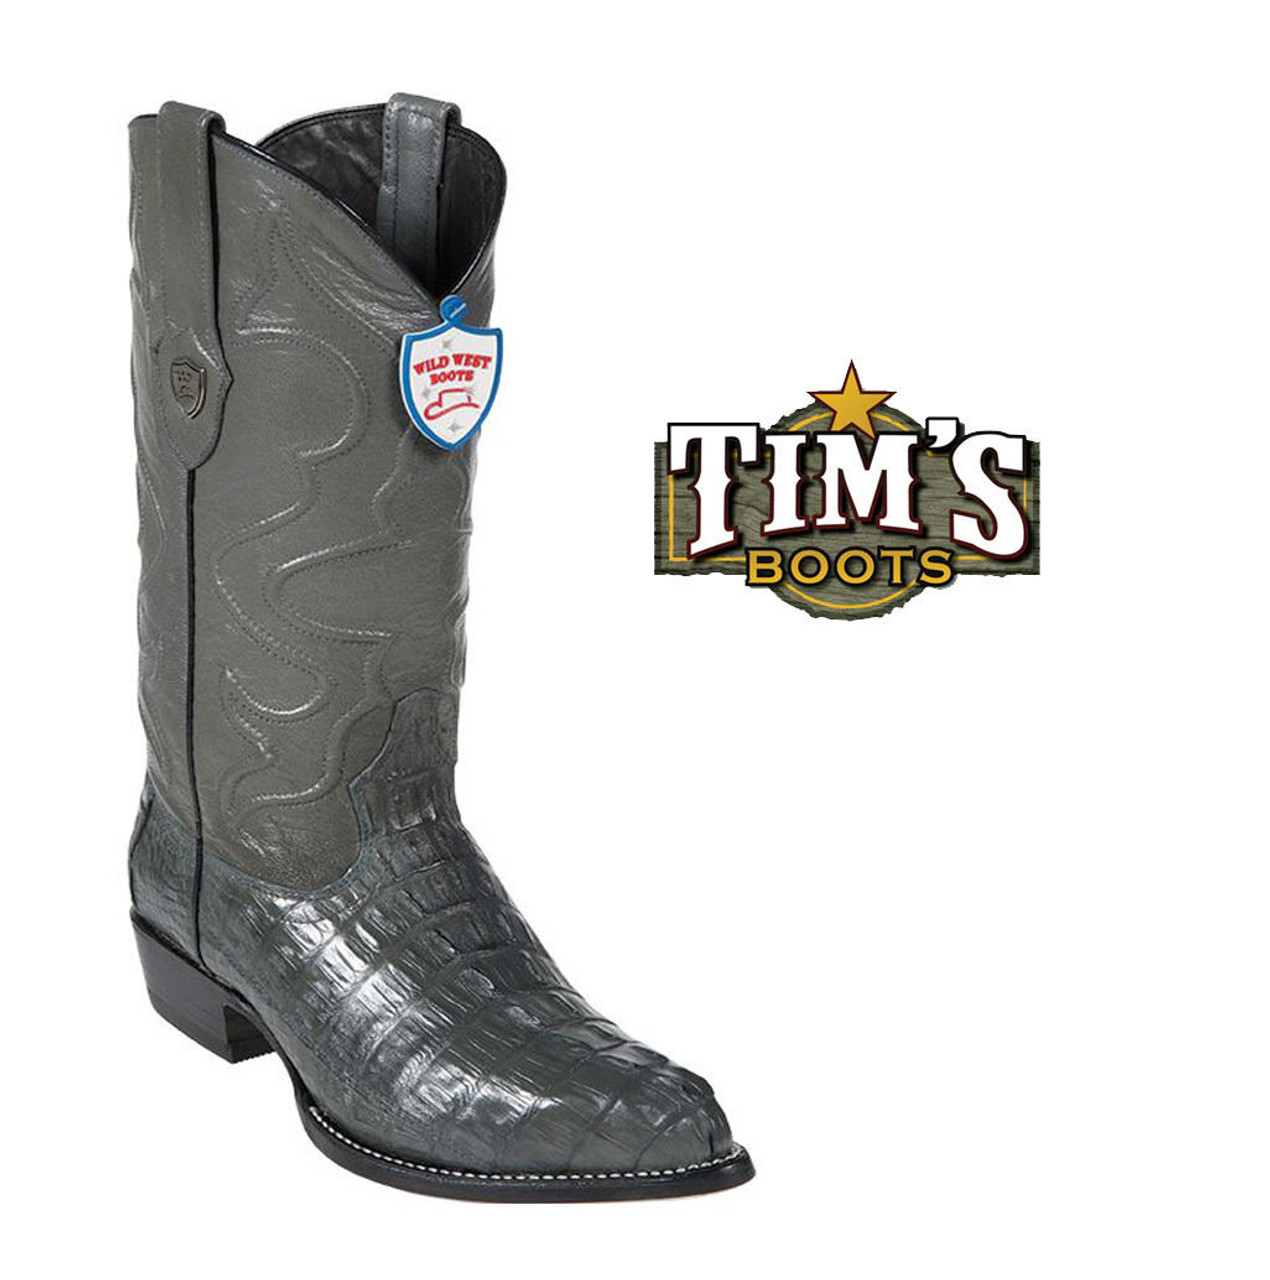 Wild West Caiman Boots Tail